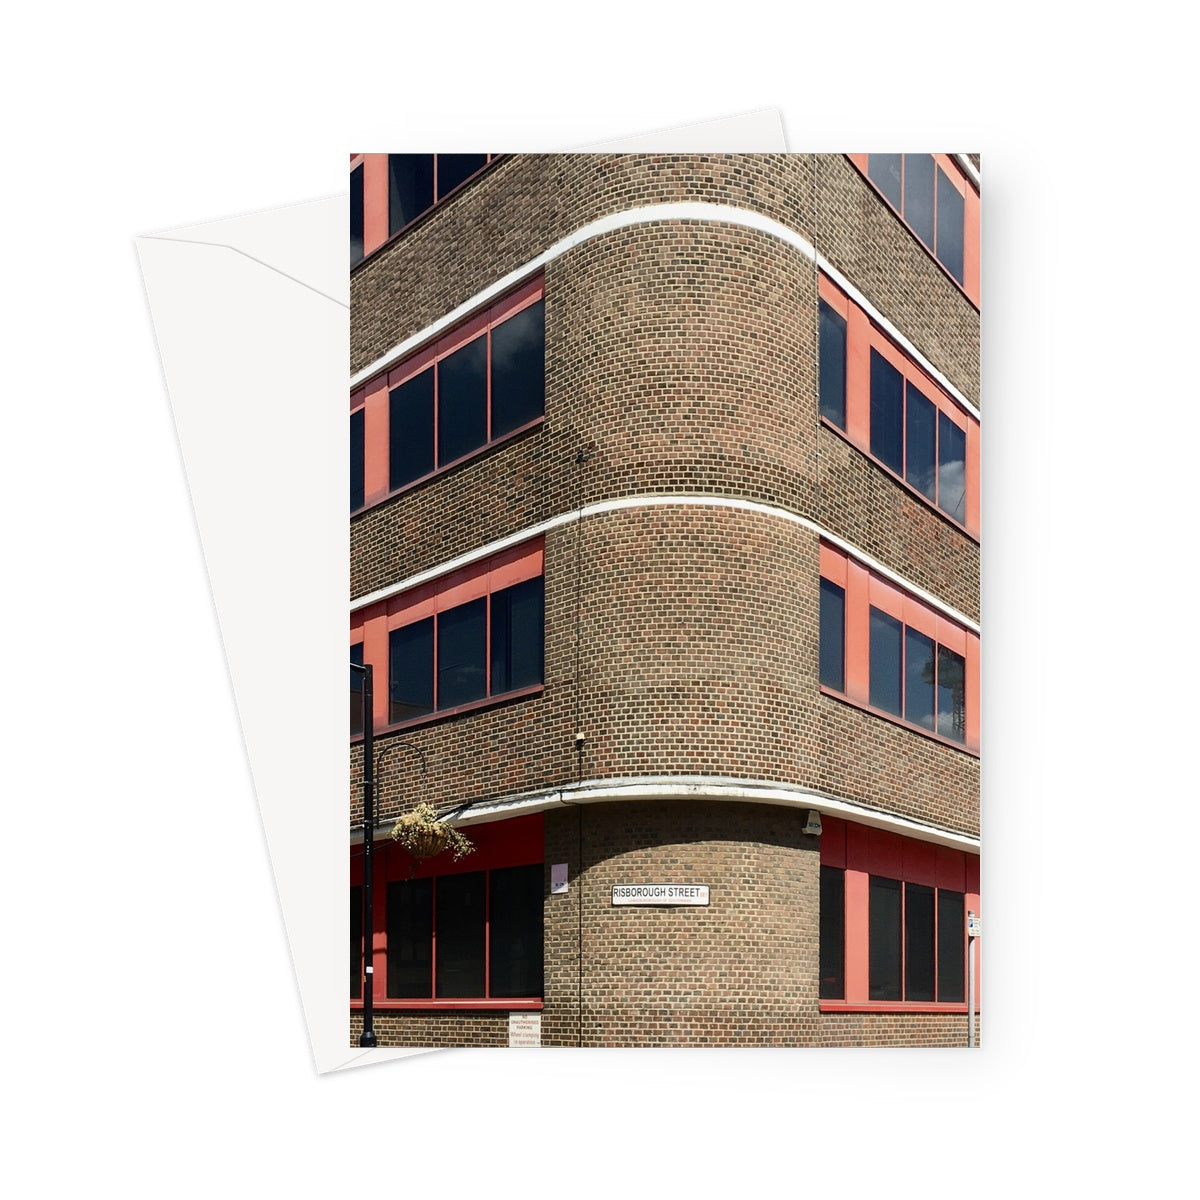 Greeting card showing corner aspect of an Art Deco brick building in Southwark. There is some detail of white stripes and the windows are framed in red metal. A sign at the bottom of the image says "Risborough Street"